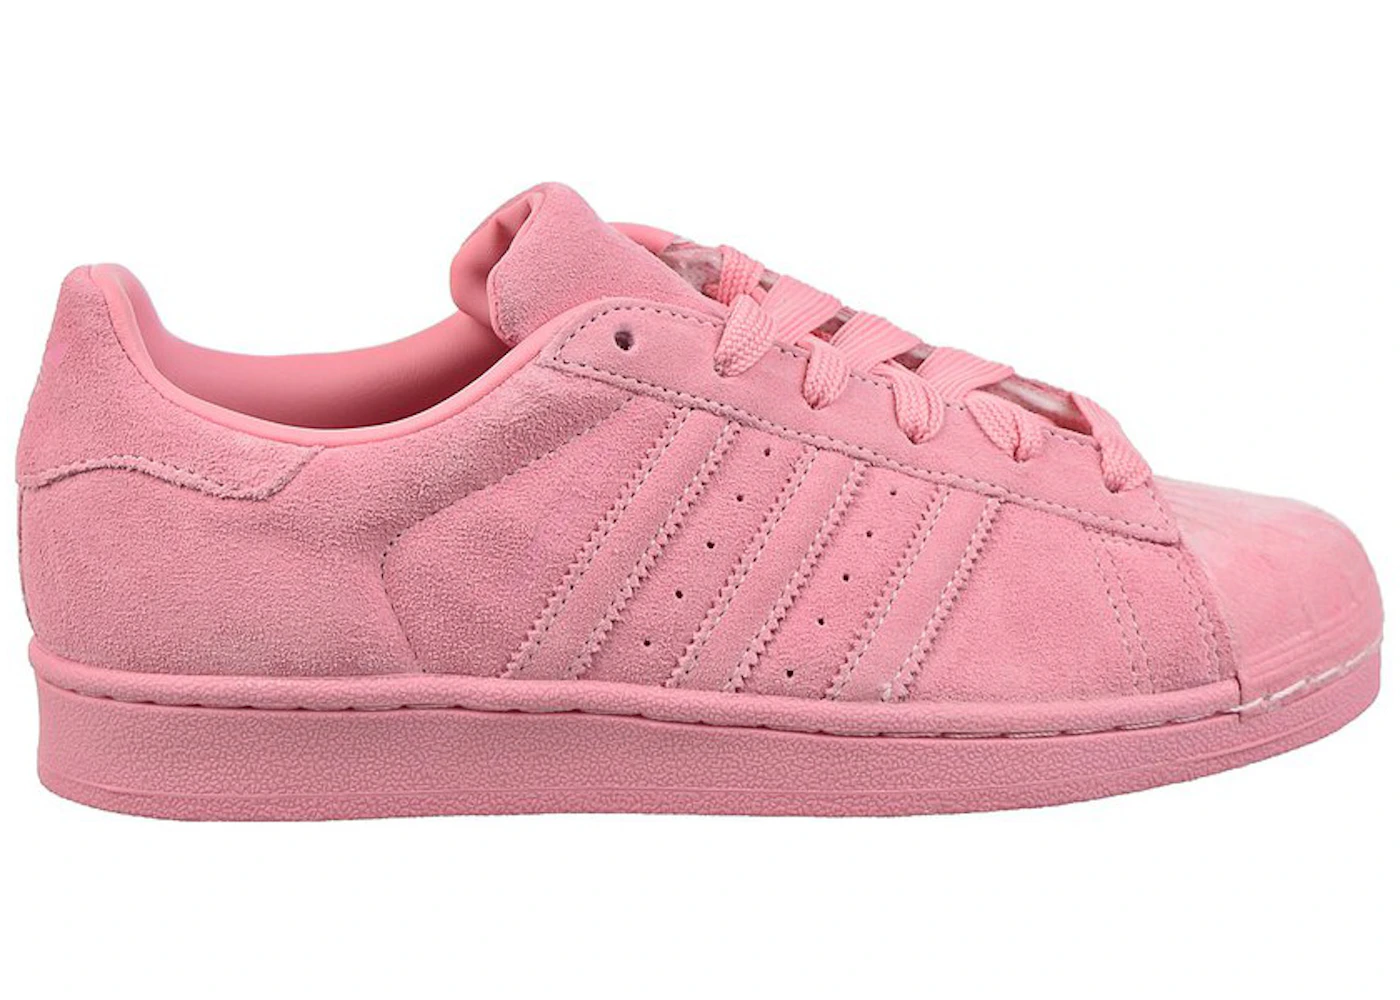 adidas Clear Pink (Women's) - CG6004 - US